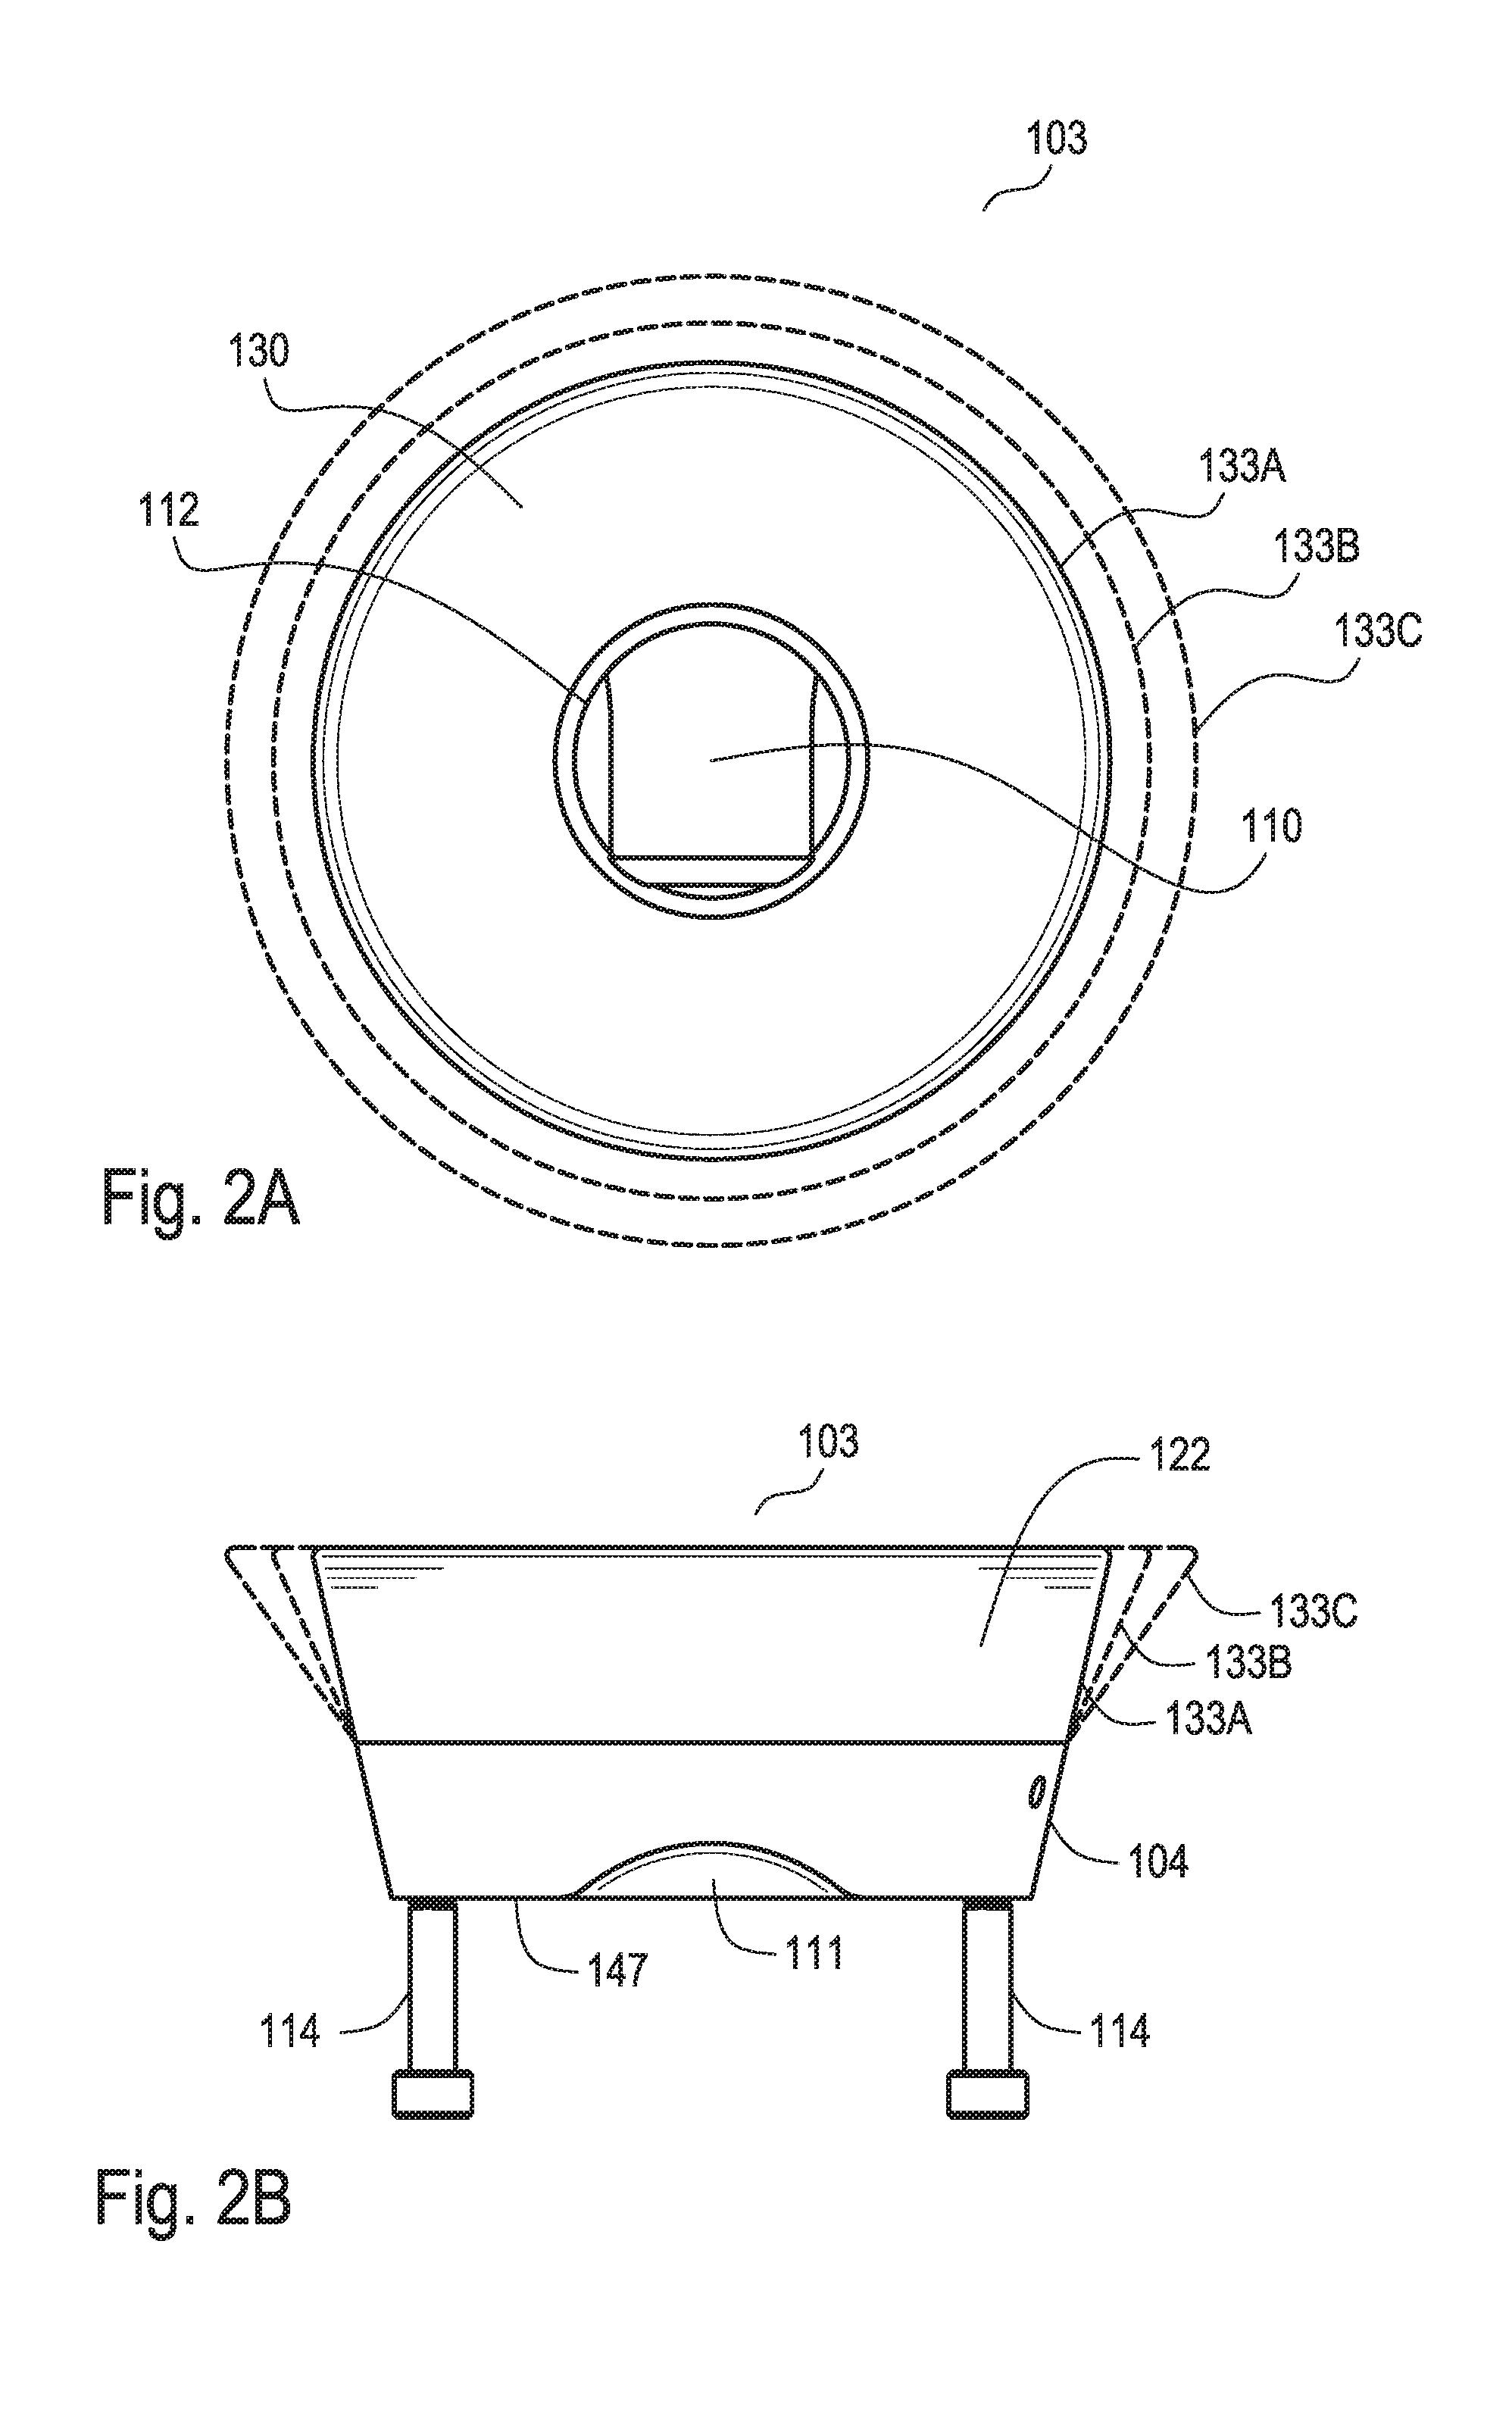 Variable elastic modulus cushion disposed within a distal cup of a prosthetic socket